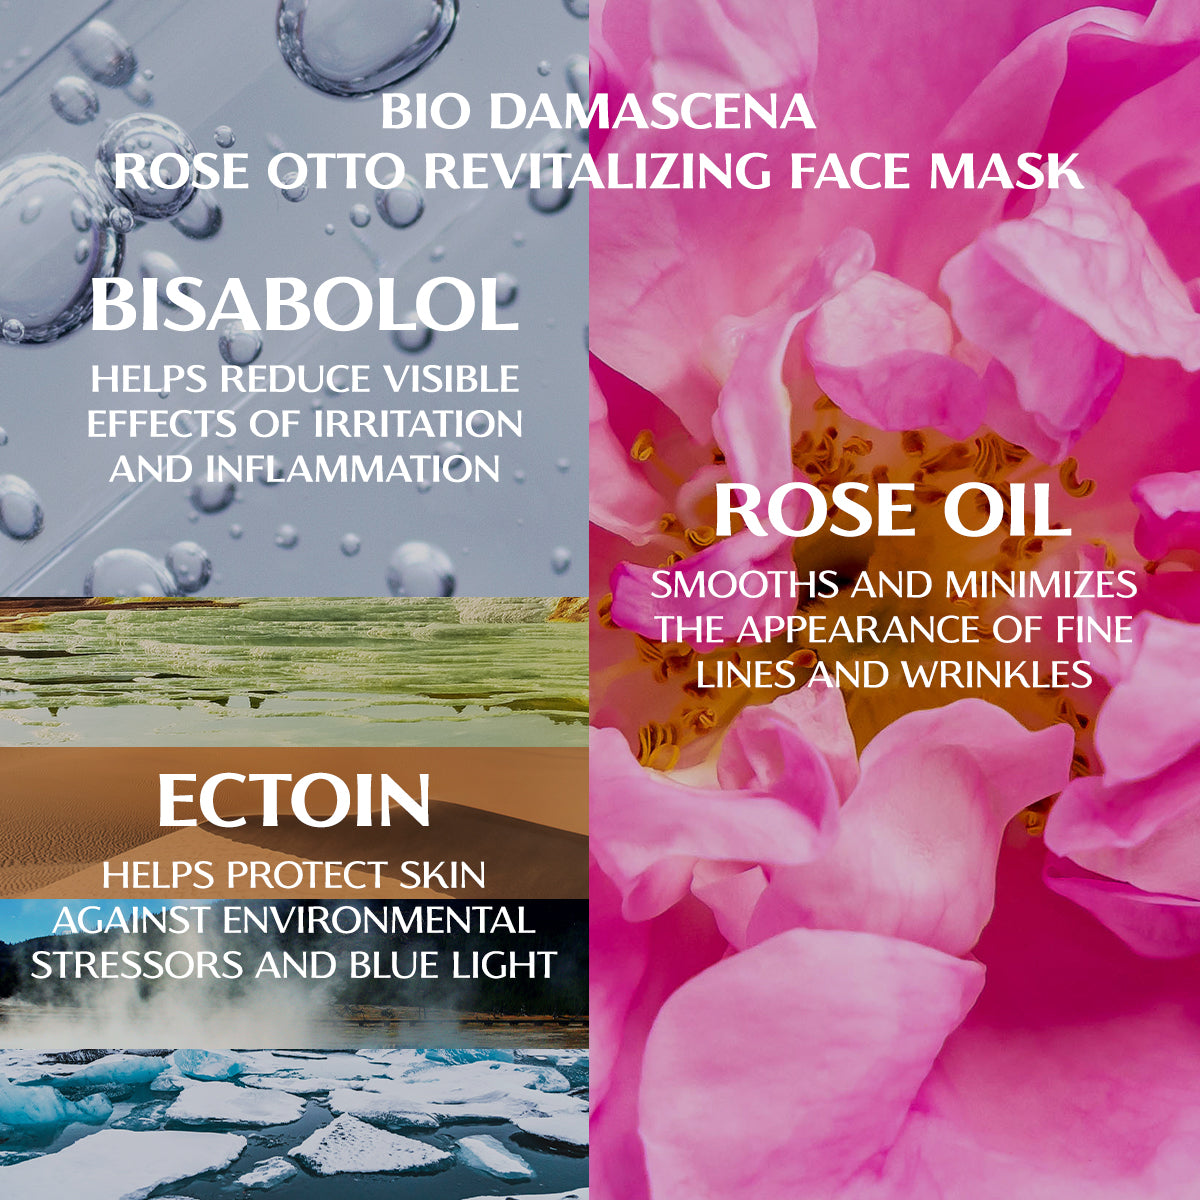 Collage of natural elements and ingredients promoting skincare benefits, with text highlighting the hydrating mask and properties of the BIO DAMASCENA ROSE OTTO REVITALIZING FACE MASK, bisabolol, rose oil, and ectoin.